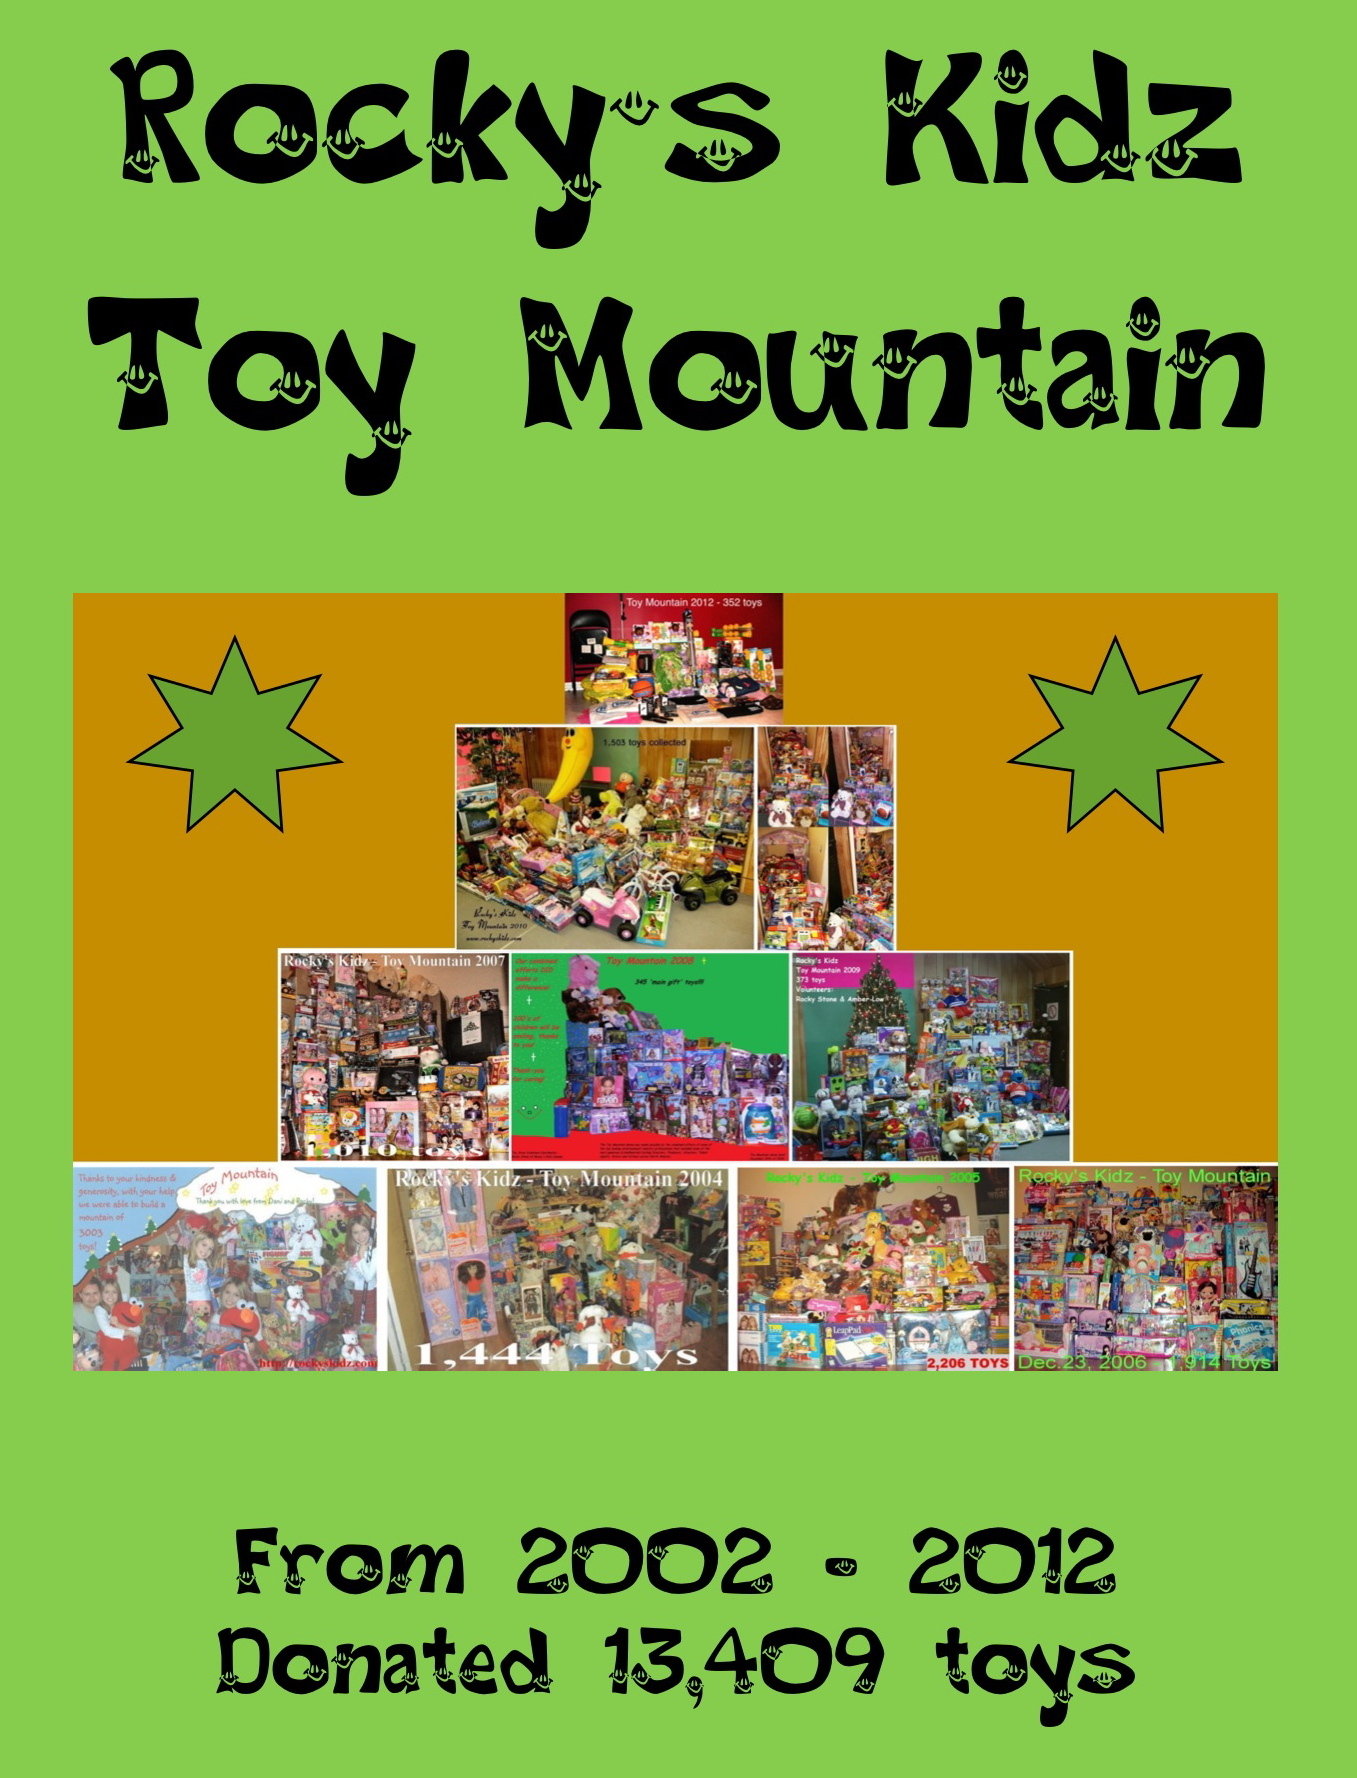 This year we celebrated our 10th year supporting the Toy Mountain Campaign from 2002 - 2012. Total toys donated to kids in need over the past 10 years - 13,409 toys